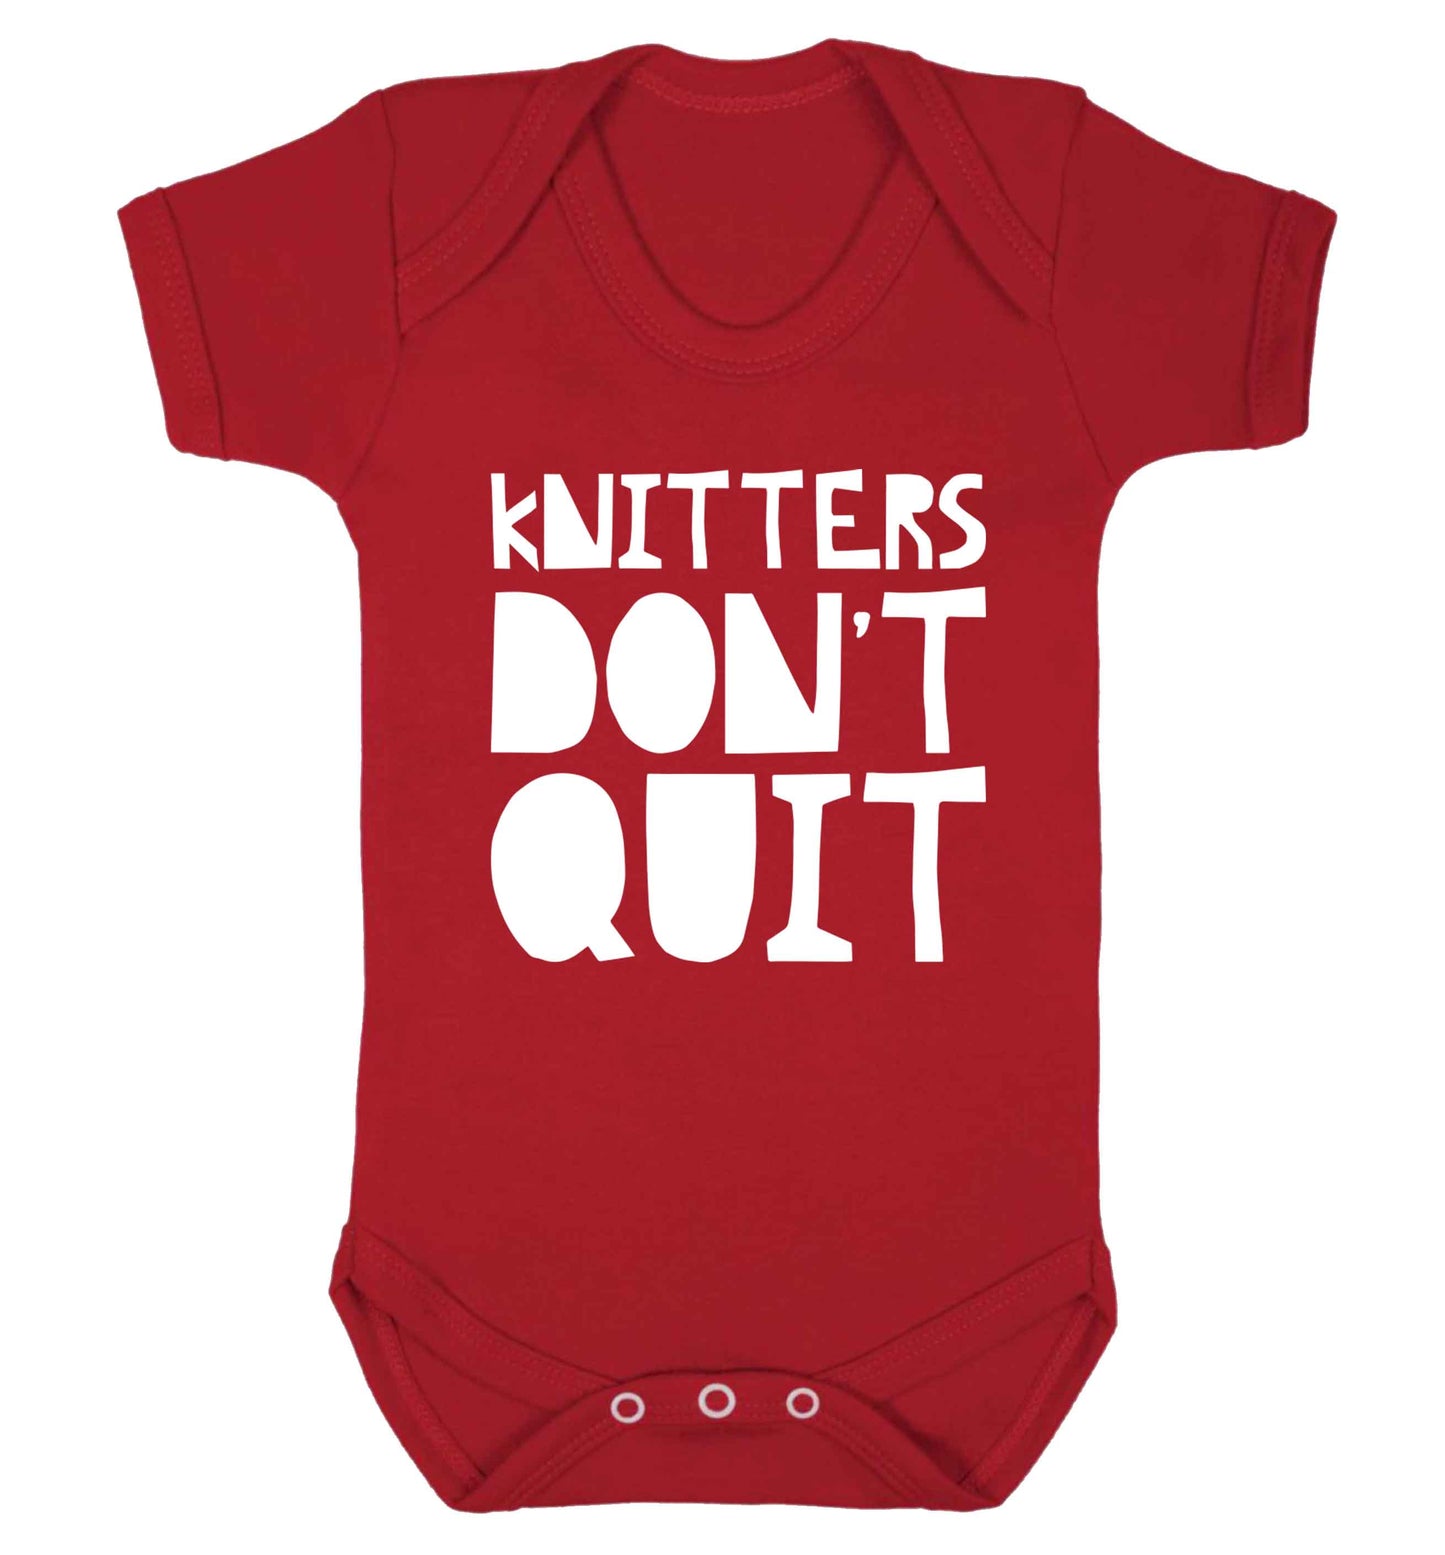 Knitters don't quit Baby Vest red 18-24 months